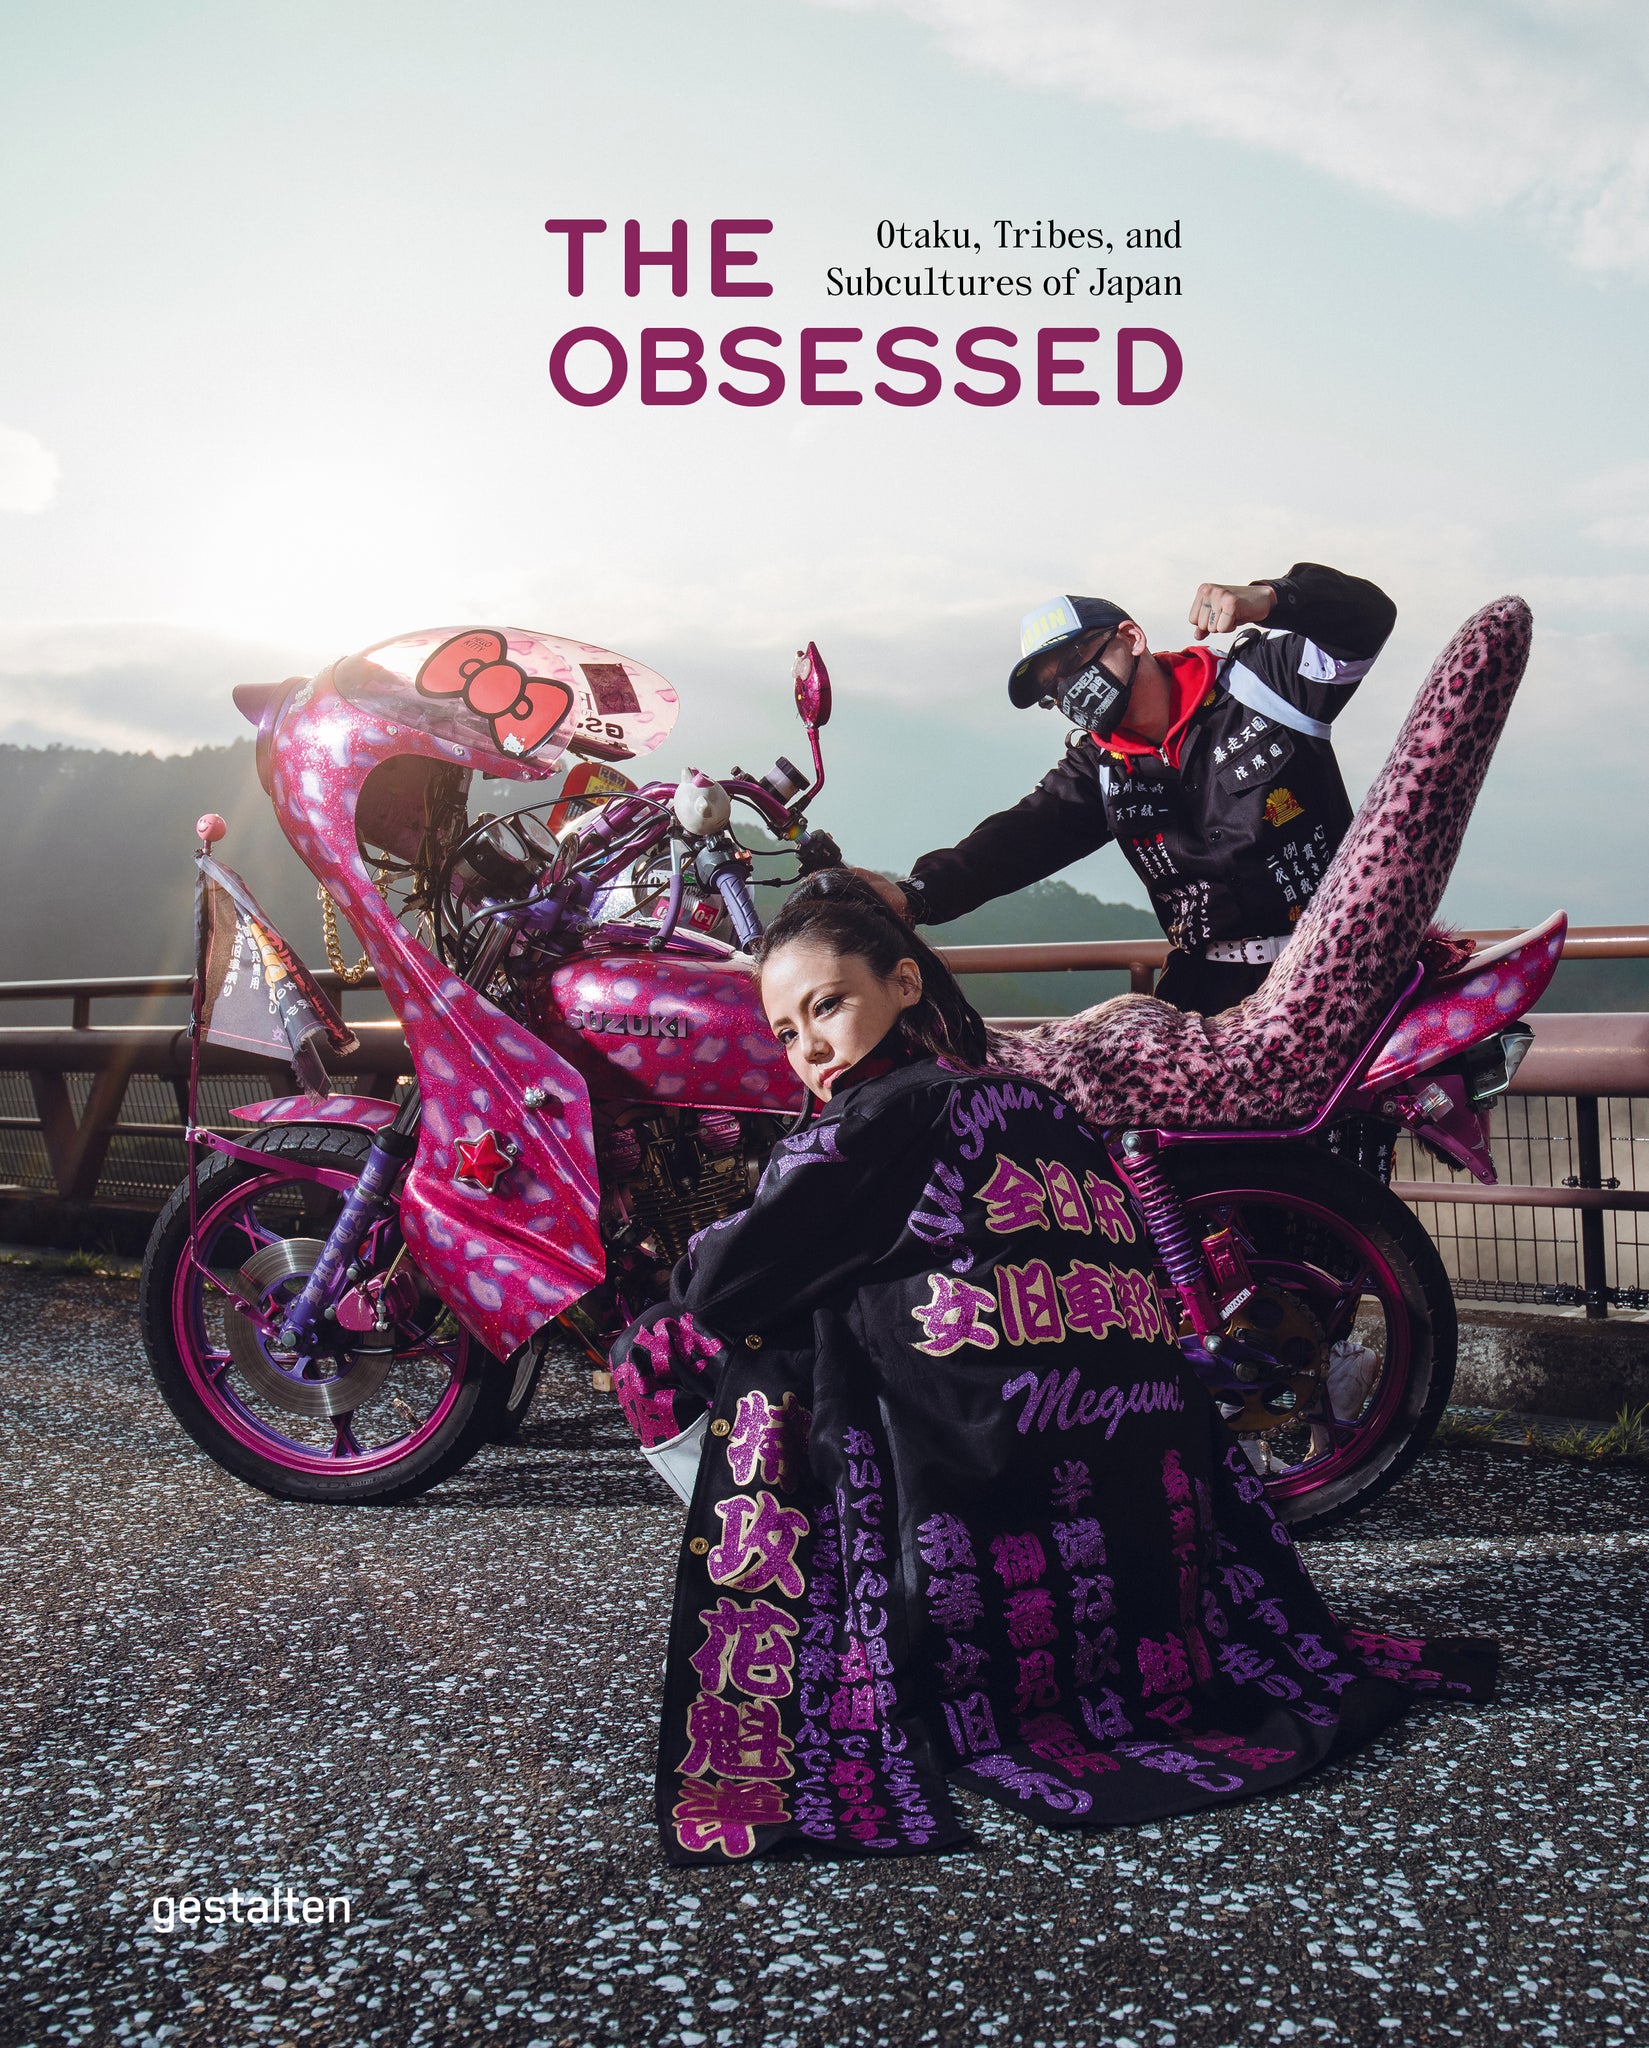 Obsessed, The: Otakus, Tribes and Subcultures of Japan (previously announced) cover